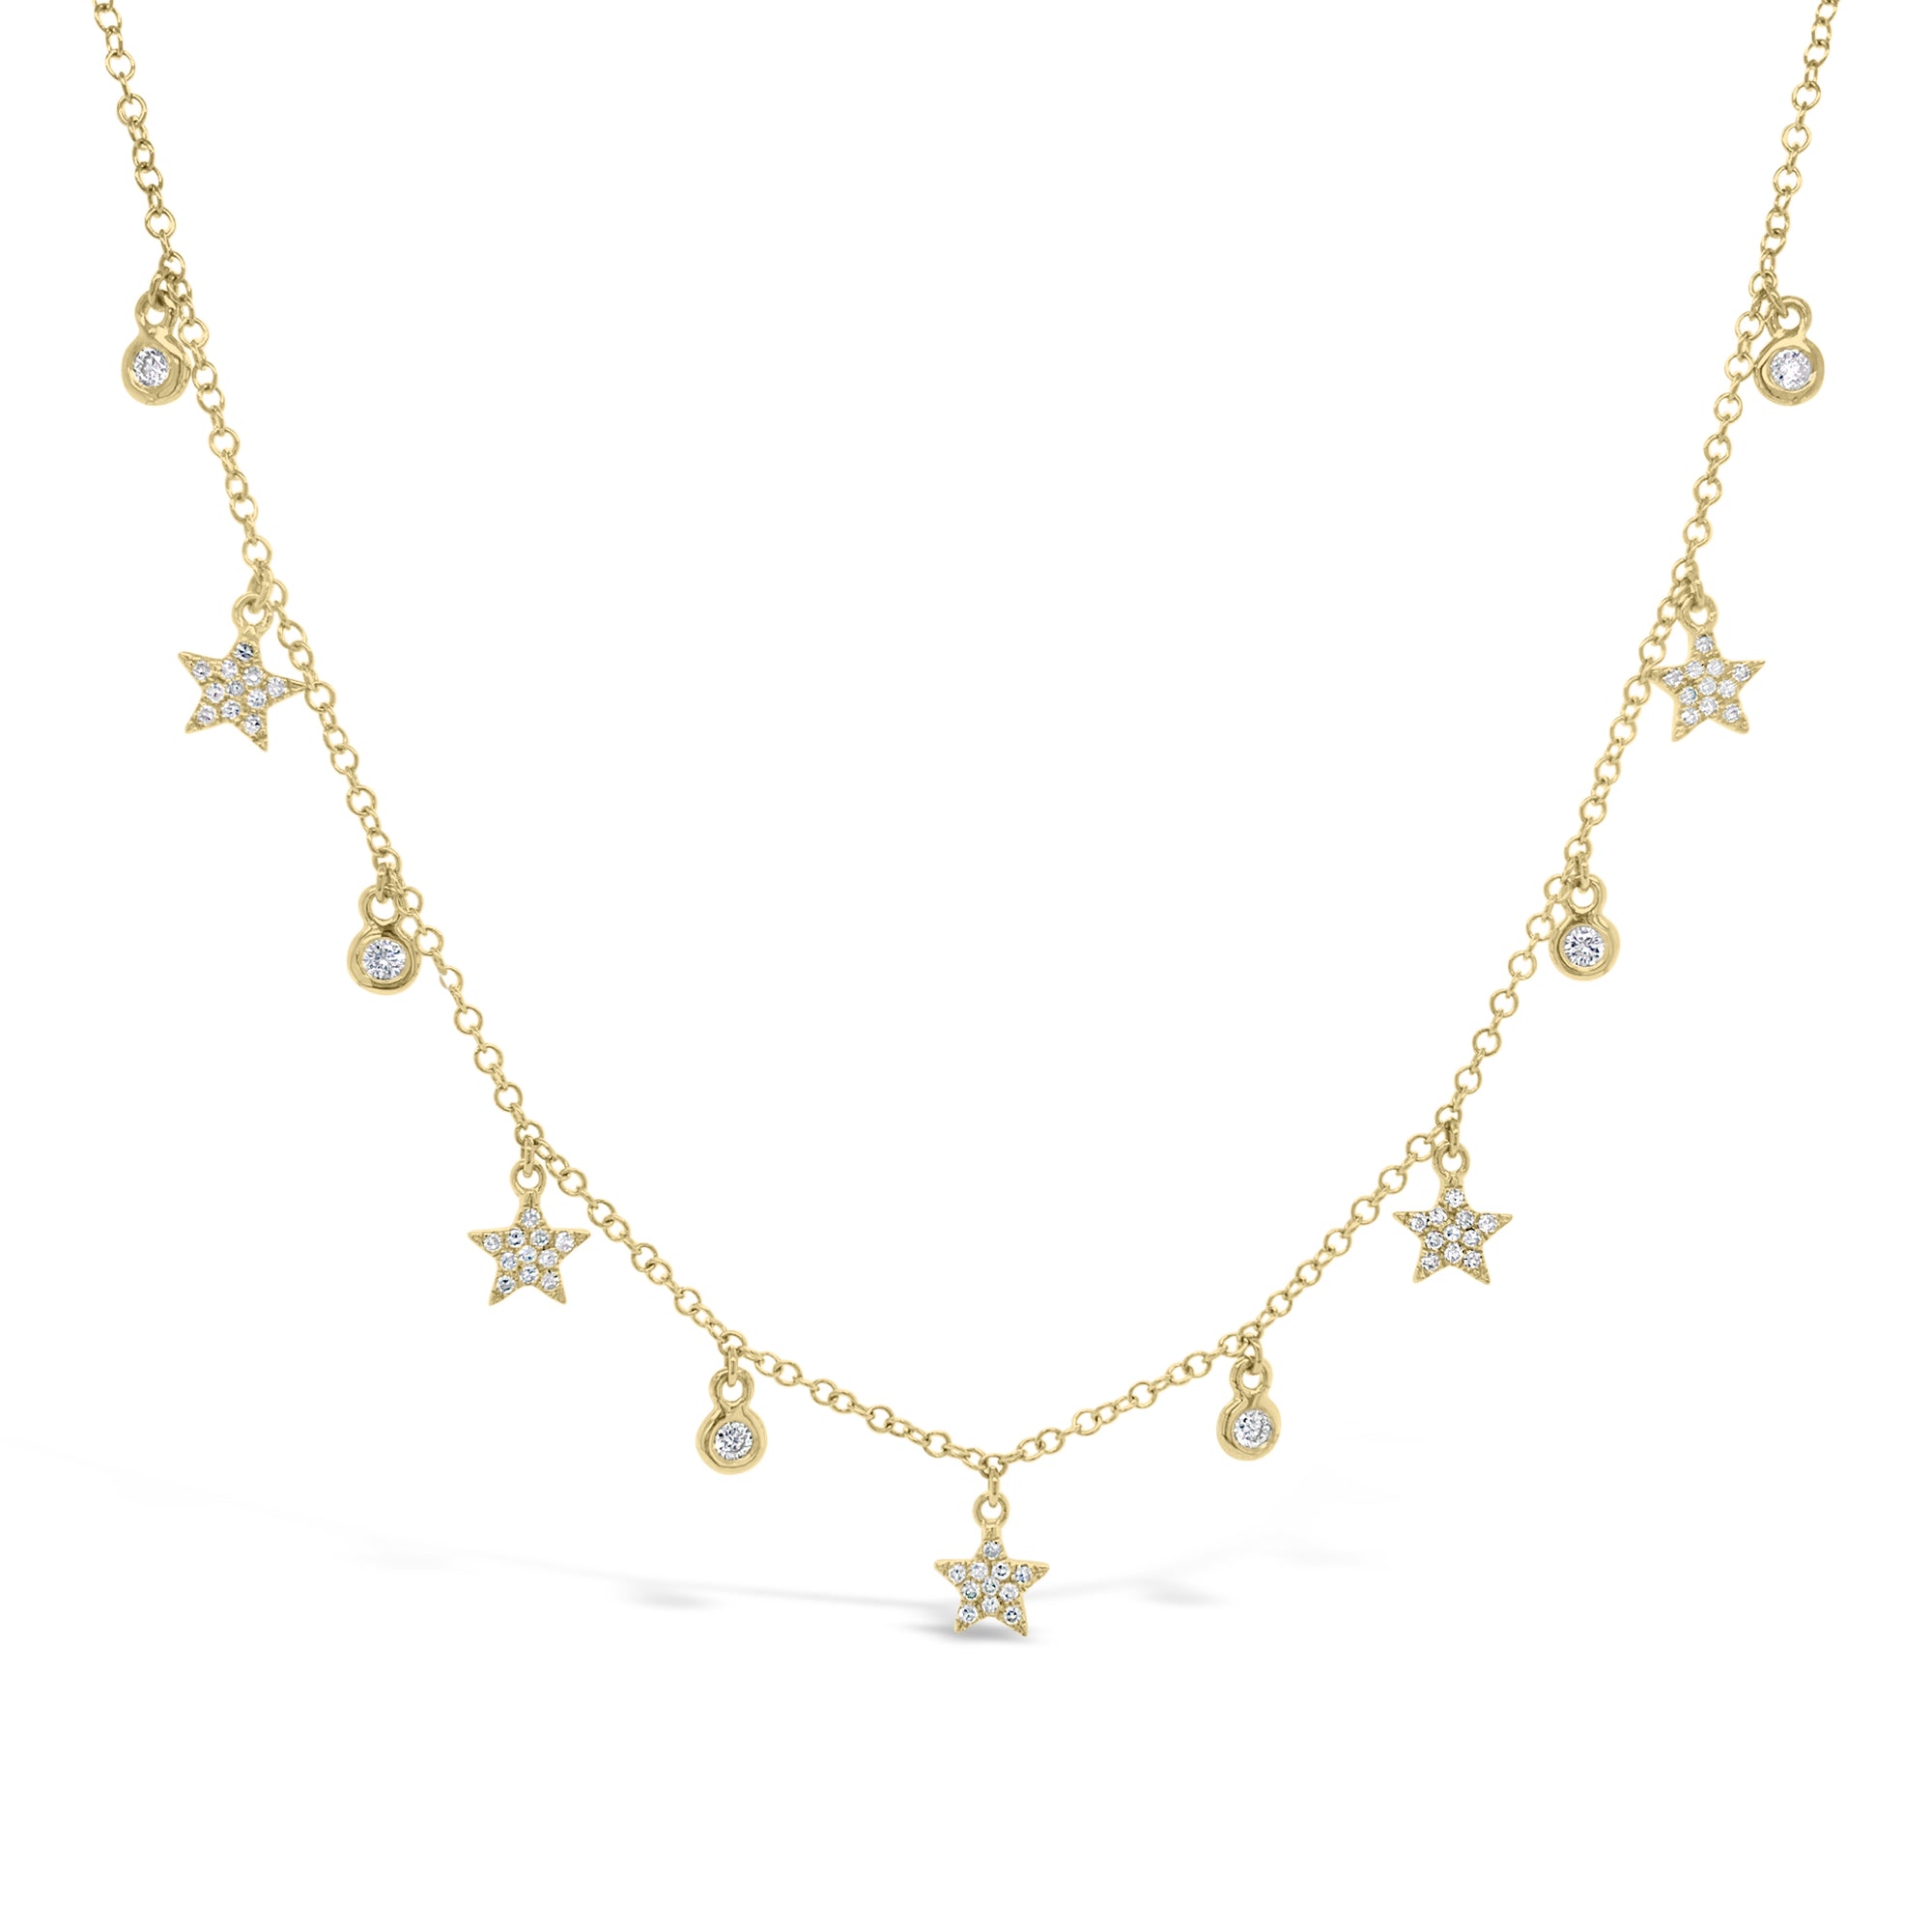 Diamond Star Drip Necklace  - 14K gold weighing 2.35 grams.  - 61 round diamonds totaling 0.24 carats.